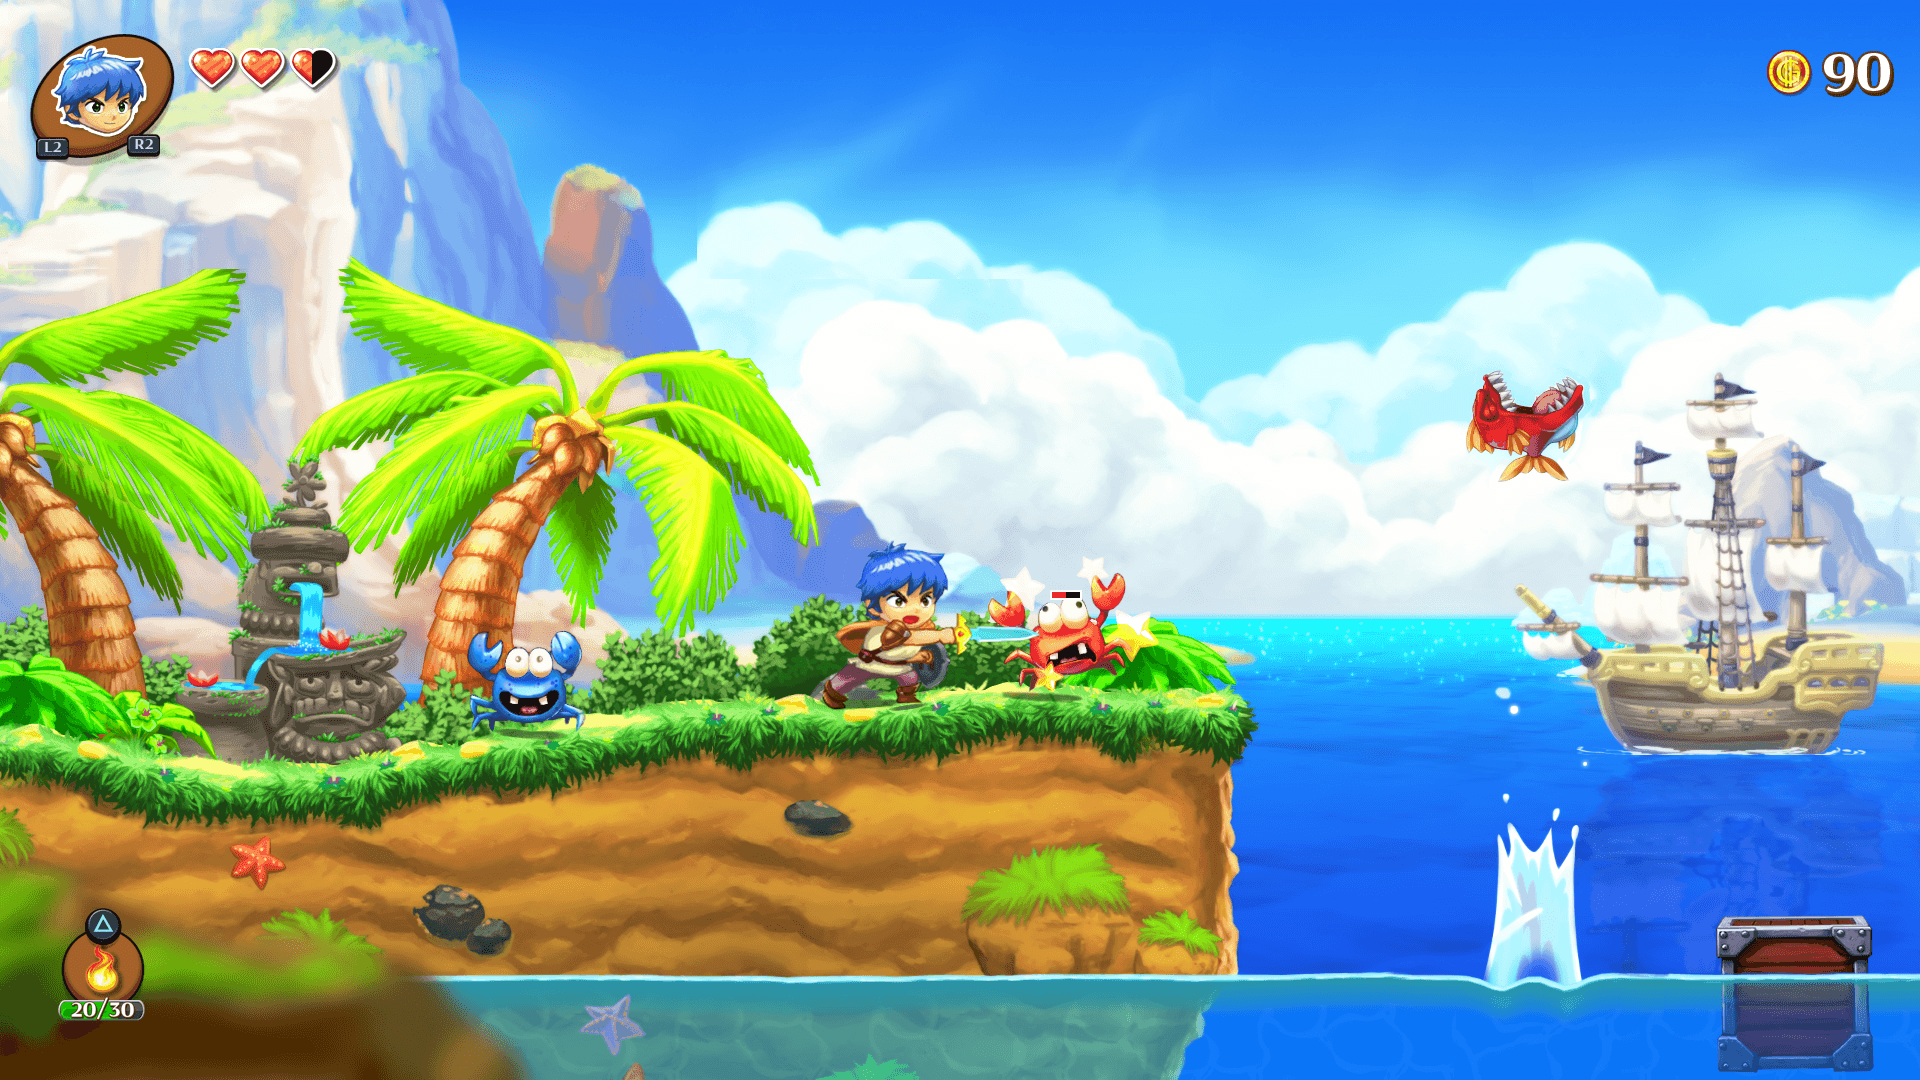 Monster Boy and the Cursed Kingdom unsure of exclusive Switch